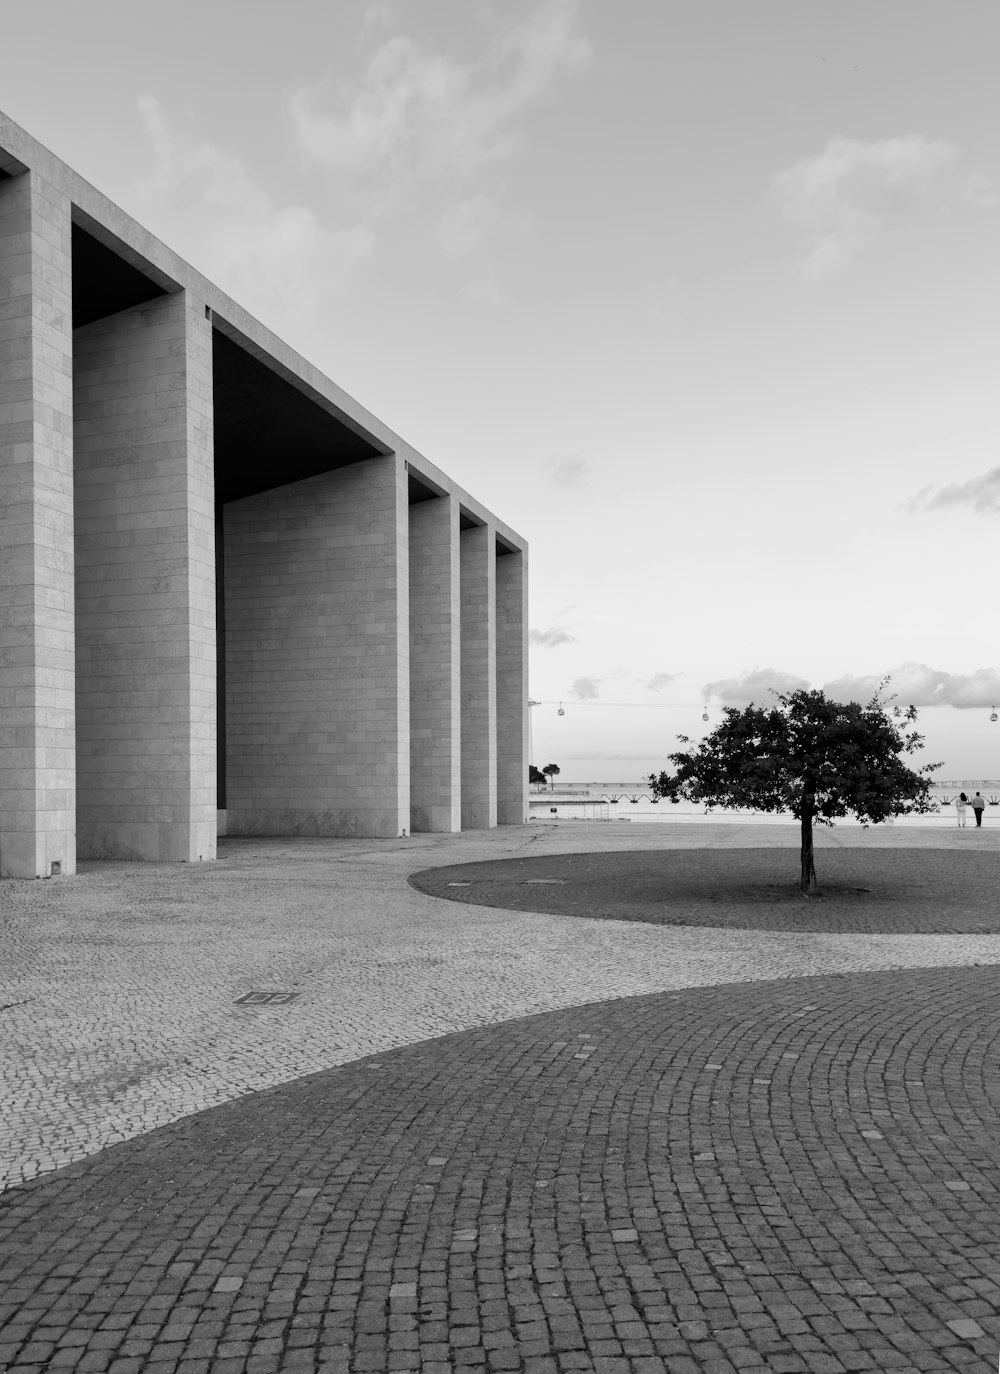 a black and white photo of a tree in front of a building